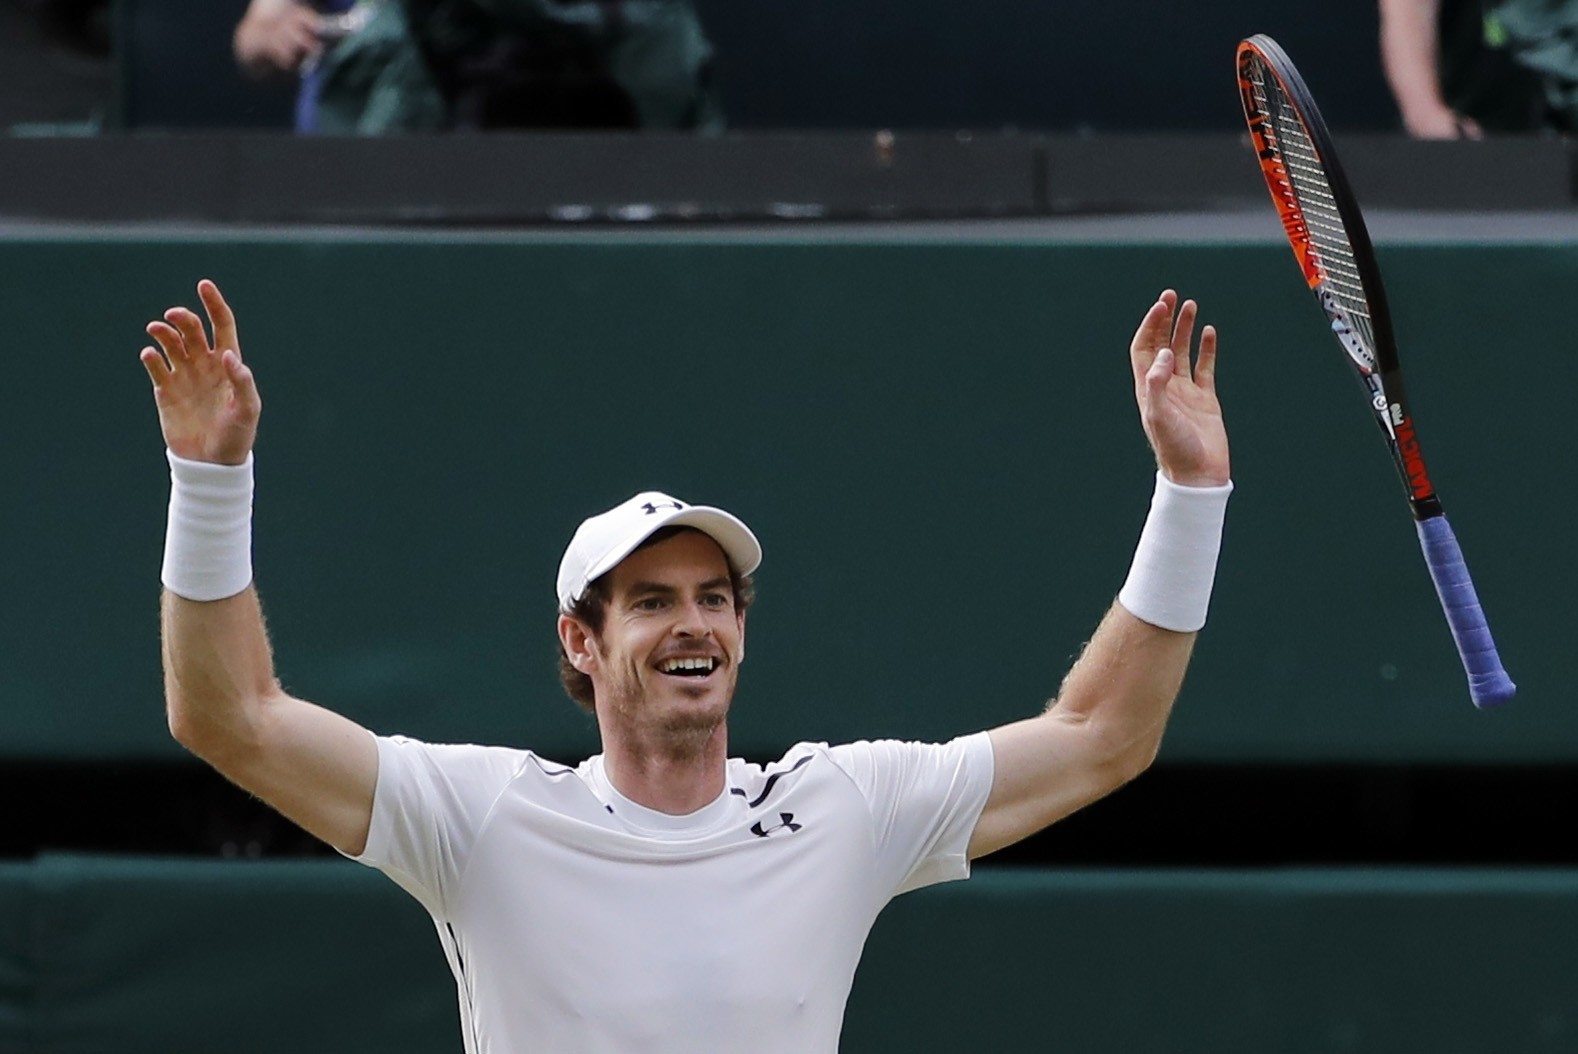 Andy Murray of Britain celebrates after beating Milos Raonic of Canada in the men's singles final on the fourteenth day of the Wimbledon Tennis Championships in London, Sunday, July 10, 2016. (AP Photo)